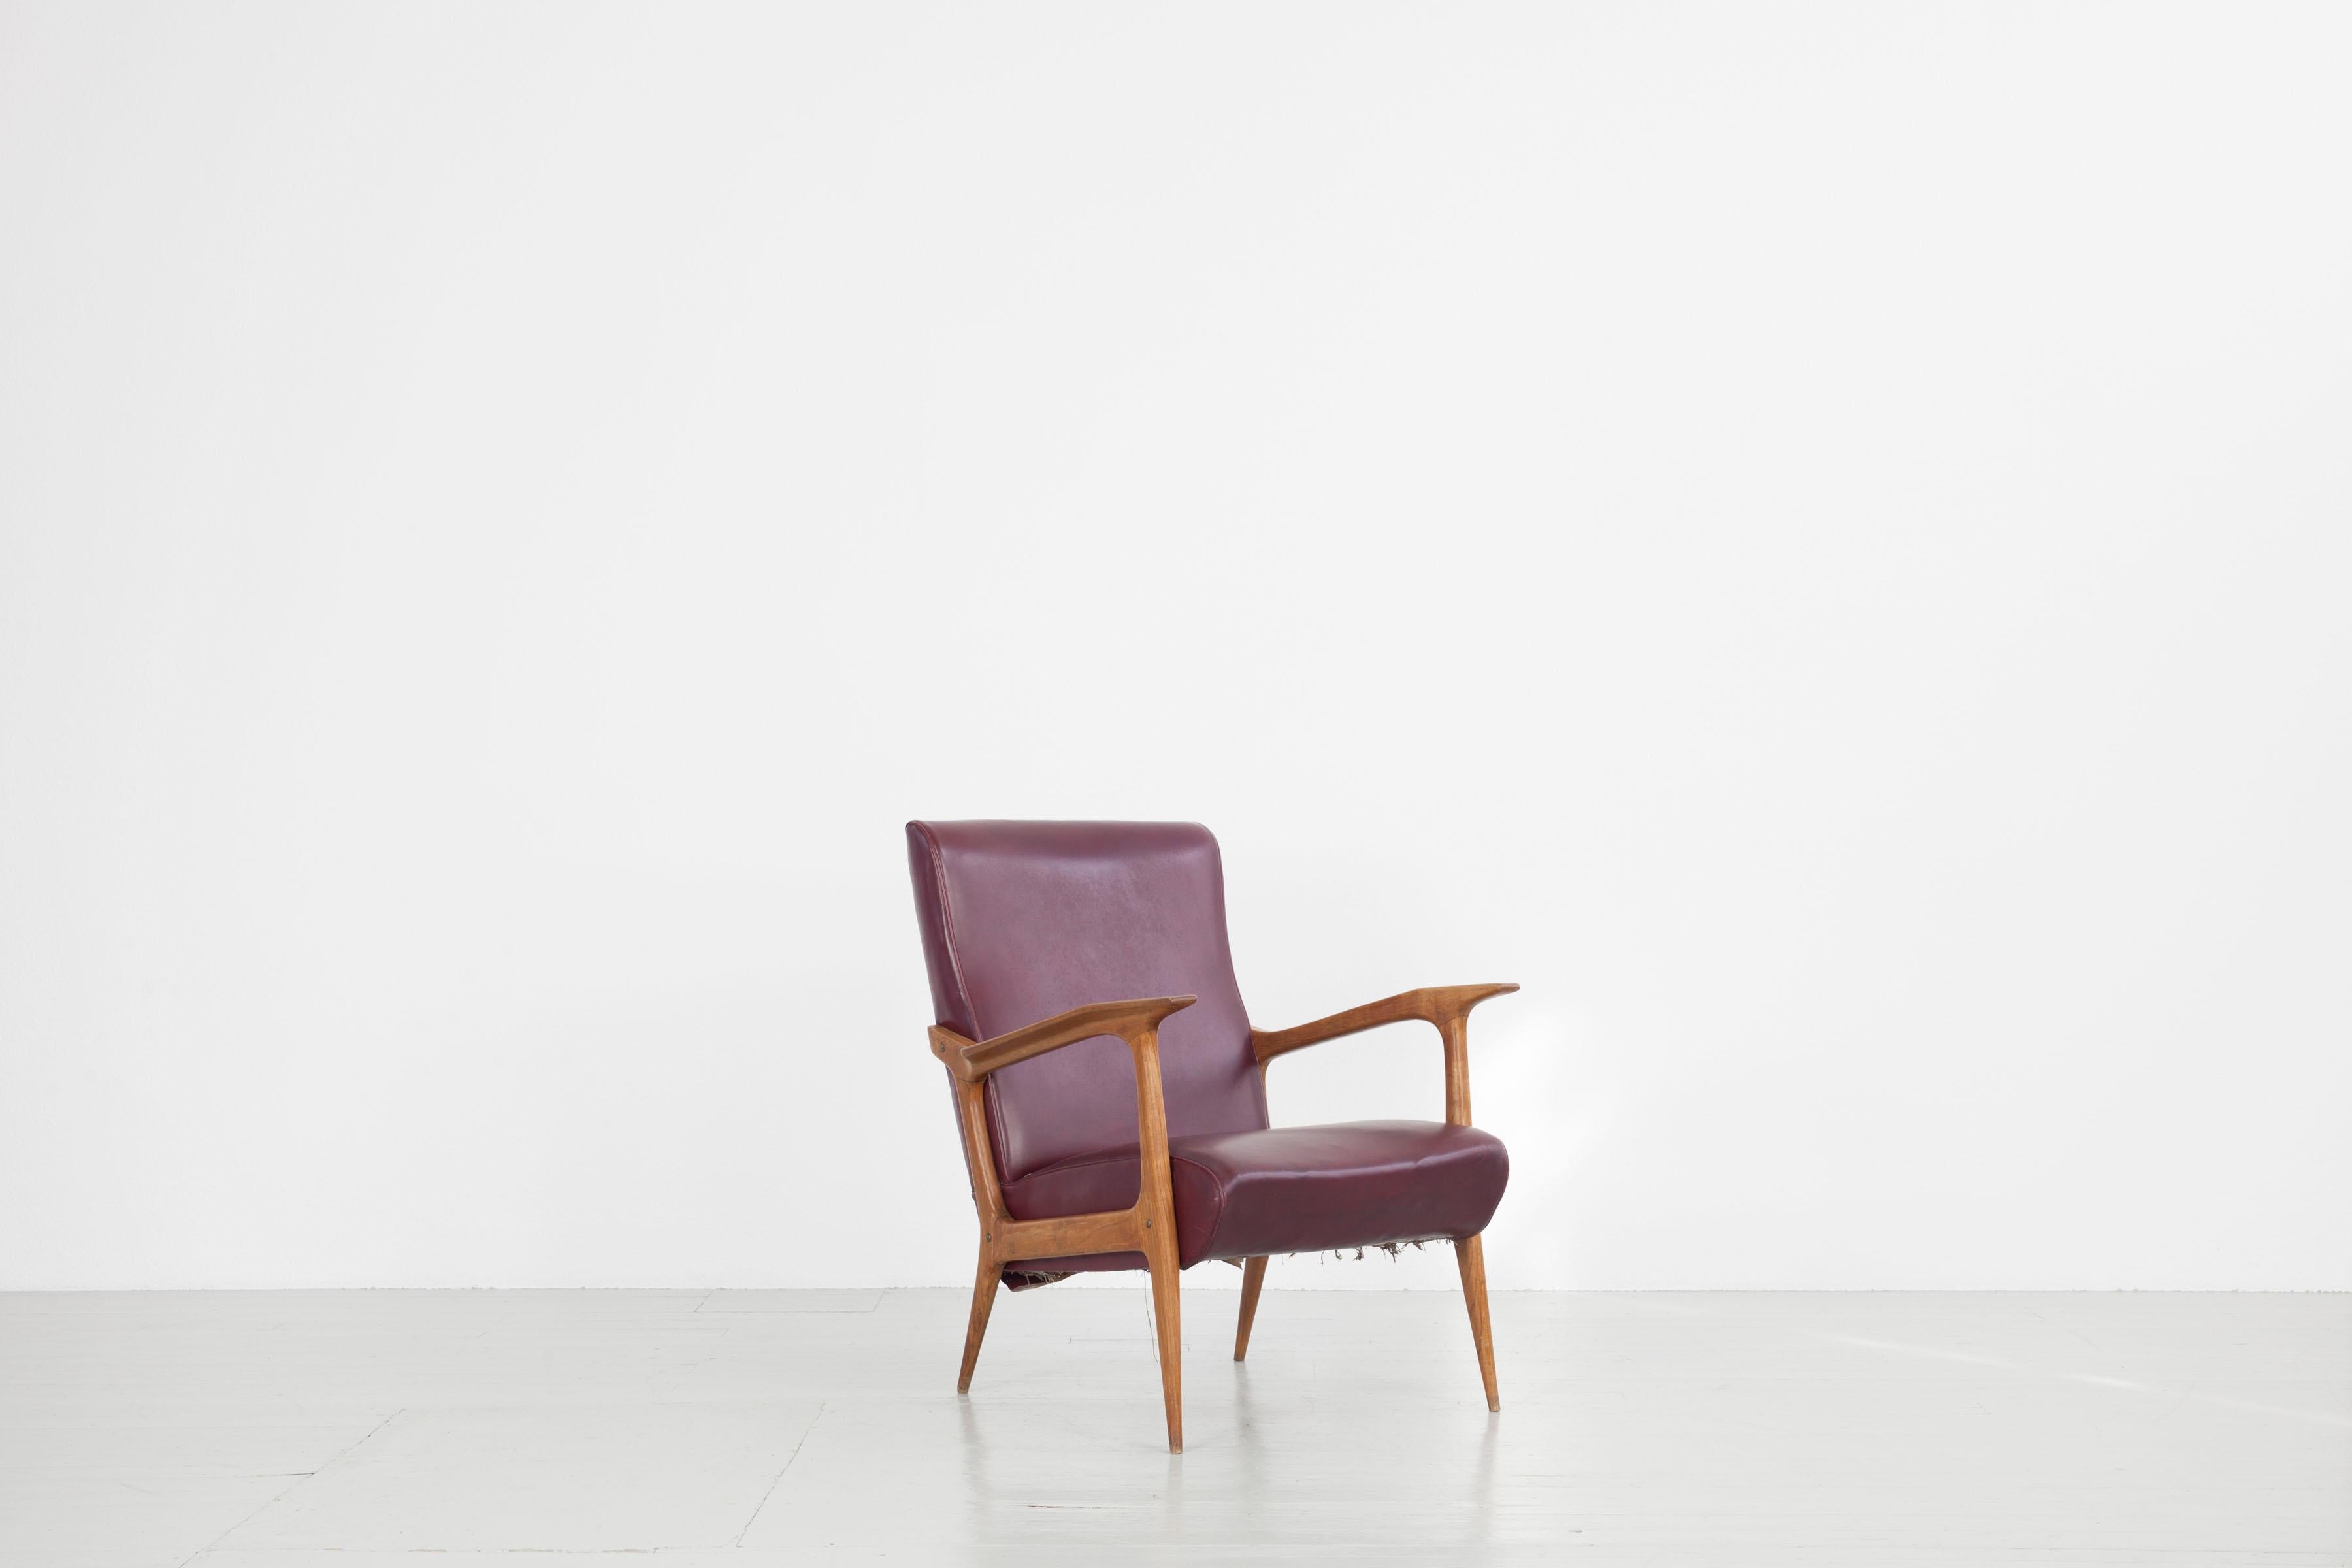 This Italian armchair was designed by Farina Morez Ruggero in the 1950s. The piece of furniture has a beautifully curved, tapered wooden frame. It needs to be reupholstered.

Do not hesitate to contact us for further details.